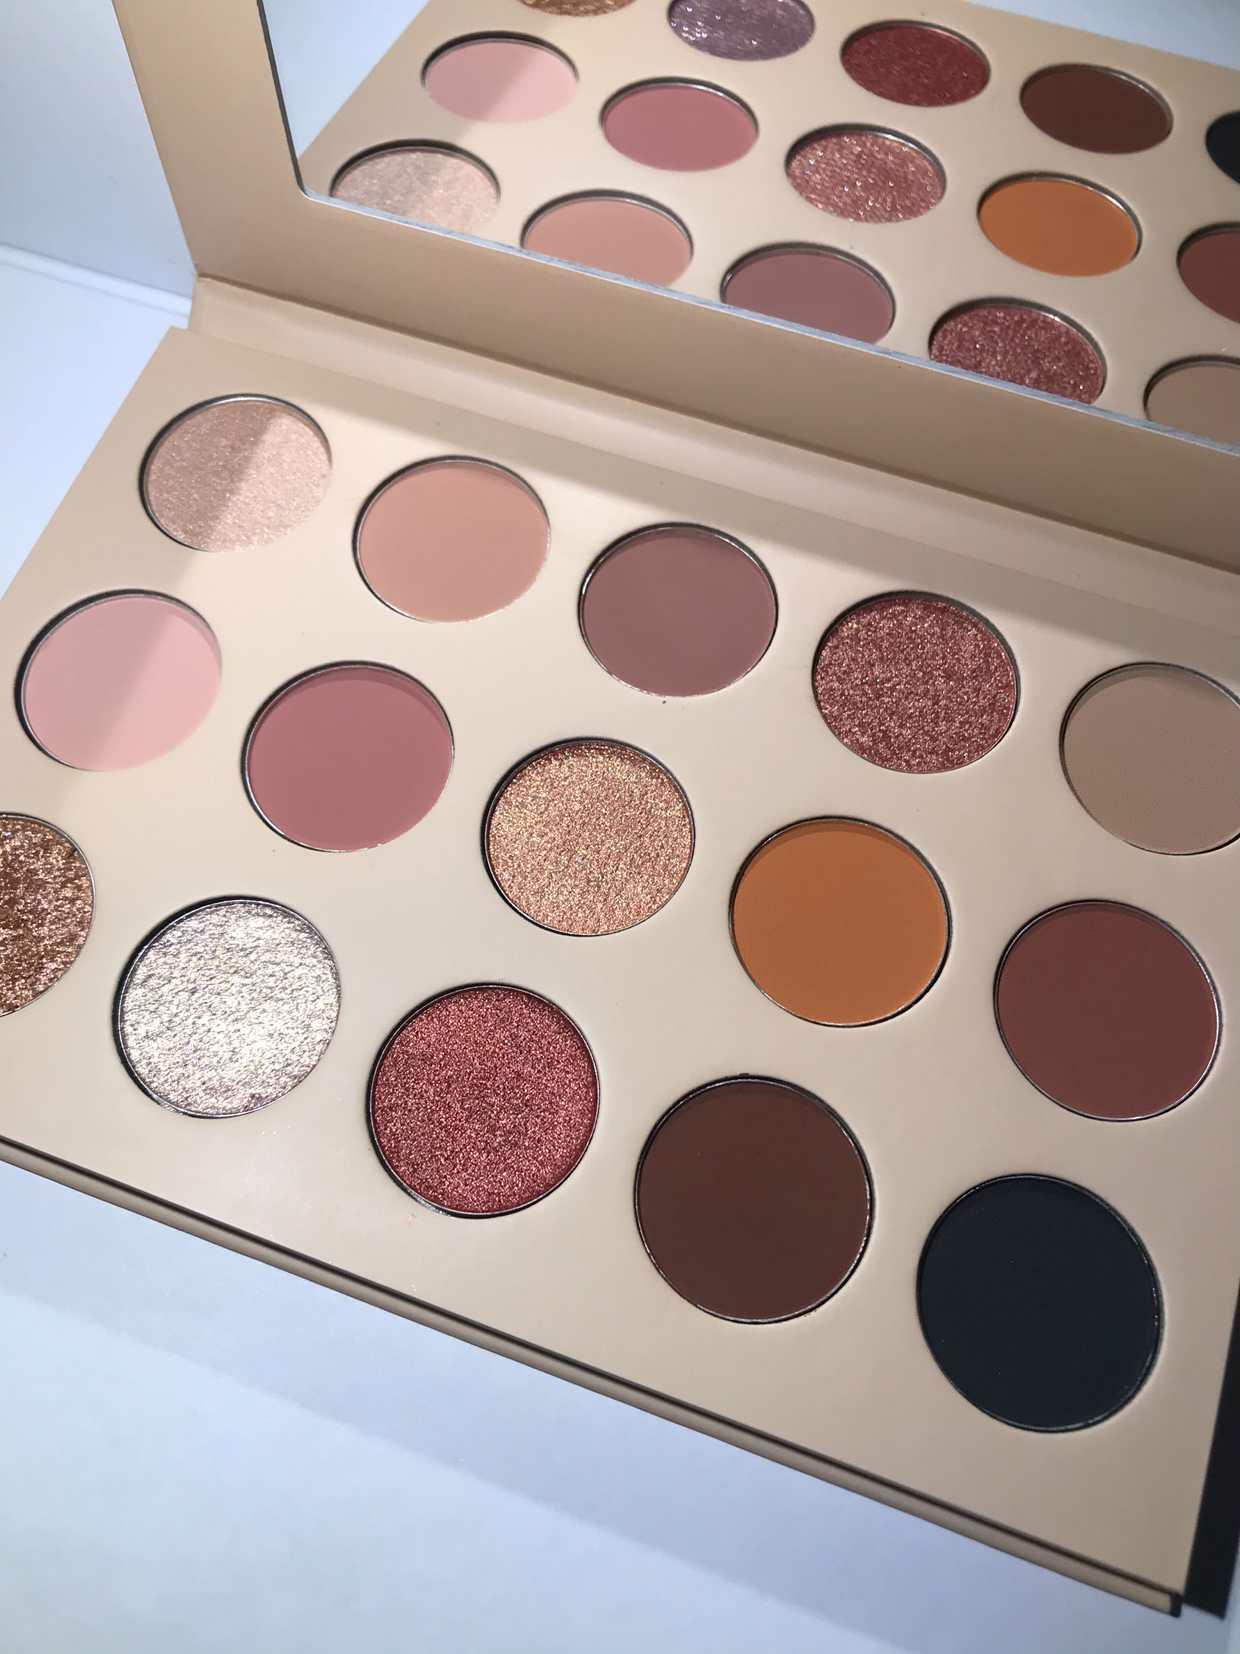 THE PRETTY NATURAL GIRL EYESHADOW PALETTE